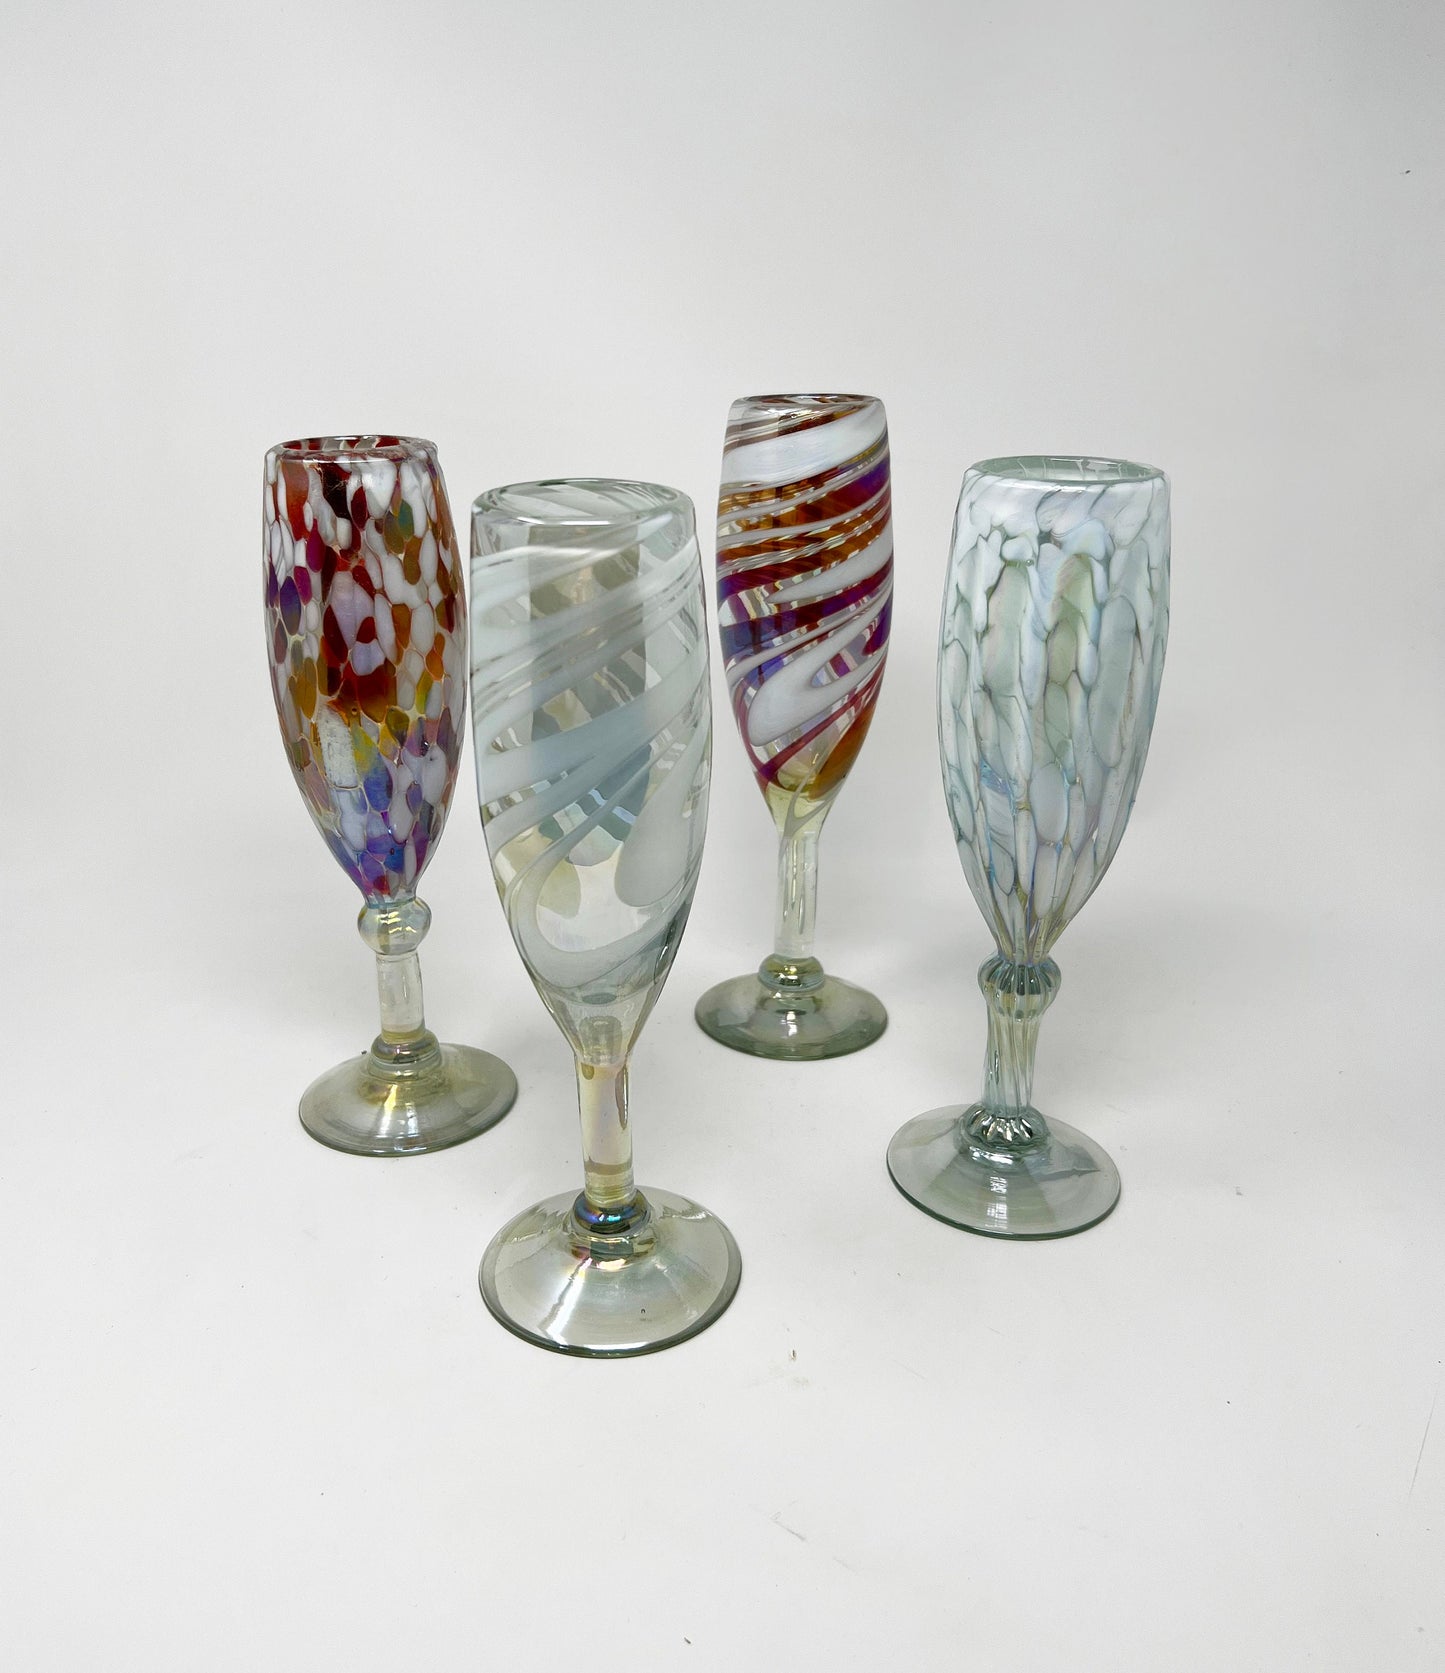 4 Hand Blown Champagne Glasses - Christmas 22 Collection (Iridescent)